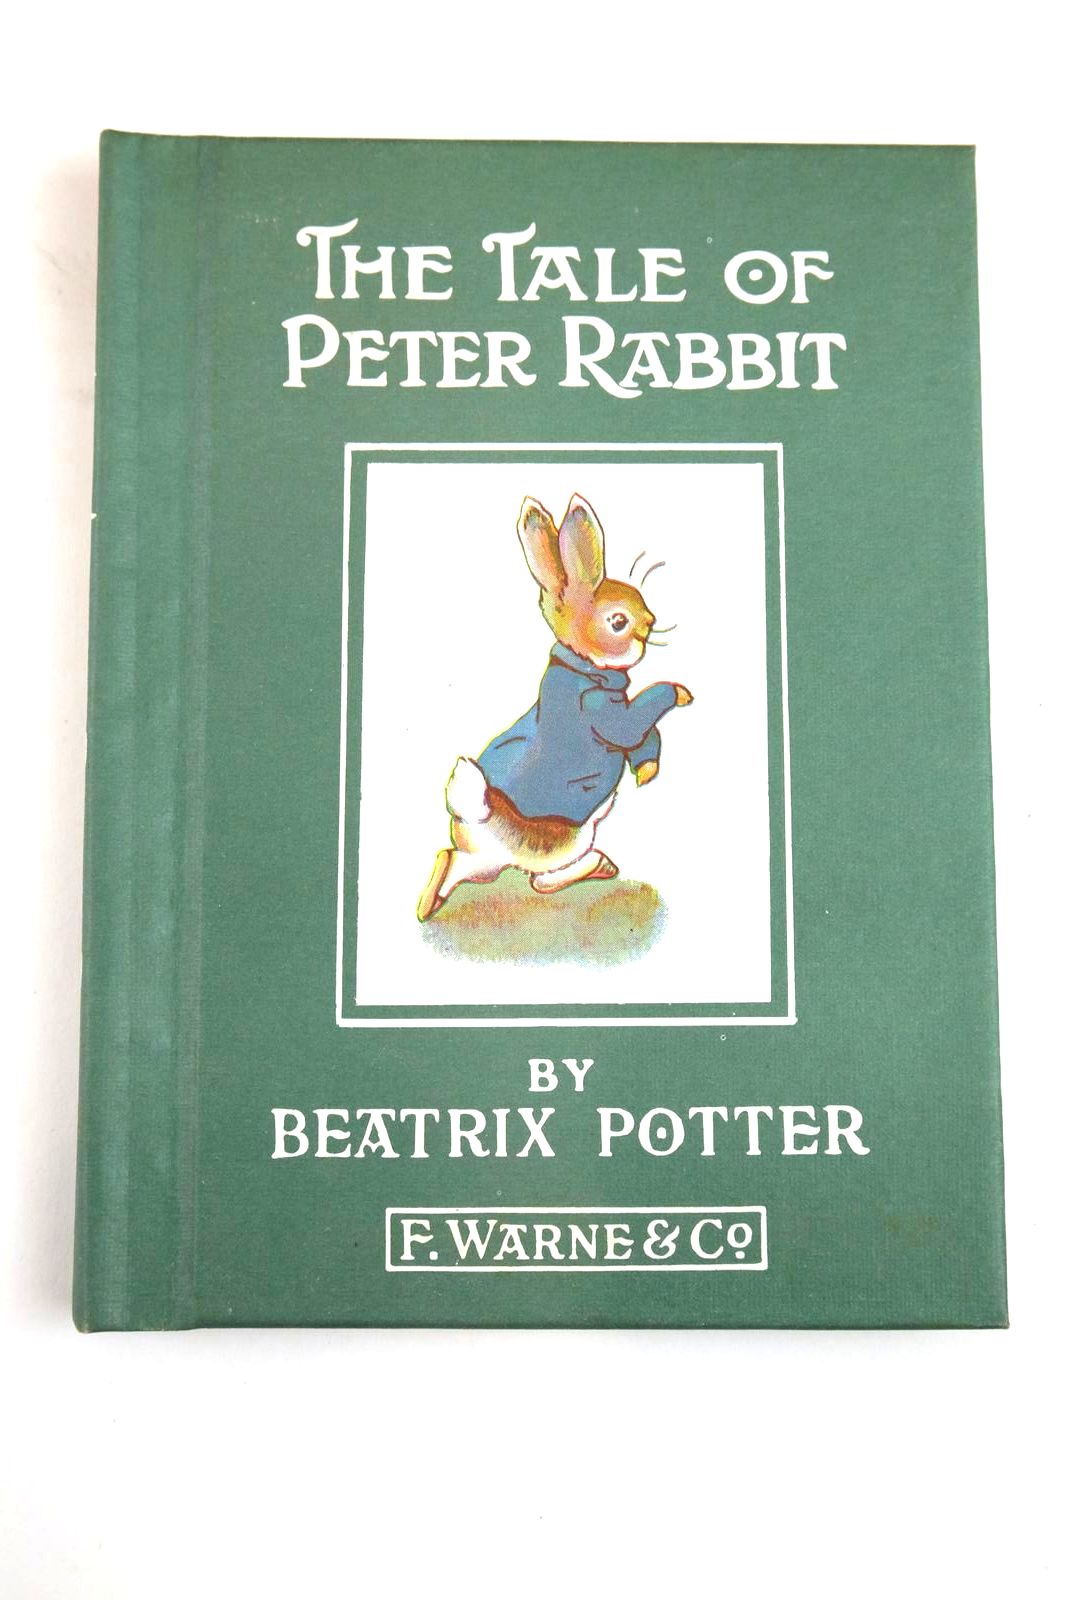 Photo of THE ORIGINAL PETER RABBIT BOOKS 23 BEATRIX POTTER NURSERY CLASSICS written by Potter, Beatrix illustrated by Potter, Beatrix published by Frederick Warne & Co. Inc. (STOCK CODE: 1321795)  for sale by Stella & Rose's Books